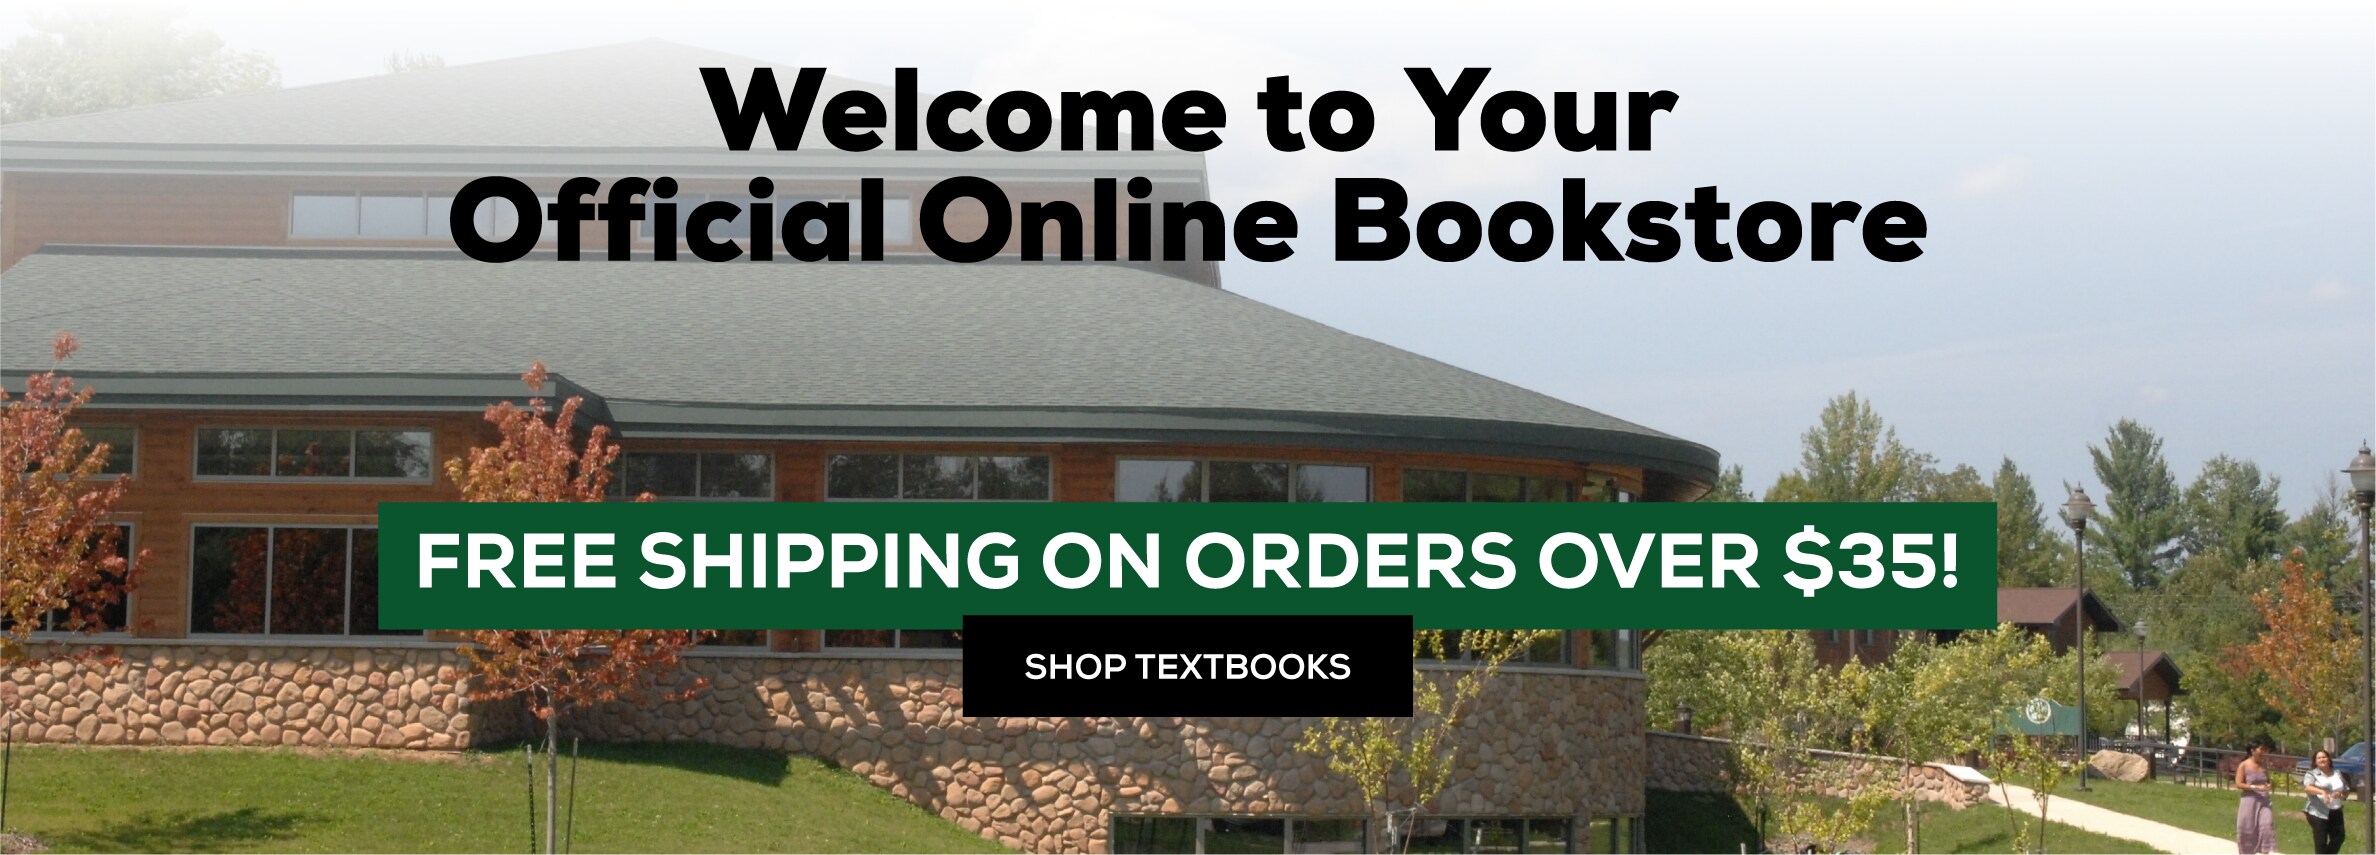 Welcome to your official online bookstore. Free shipping on orders over $35! Shop textbooks.